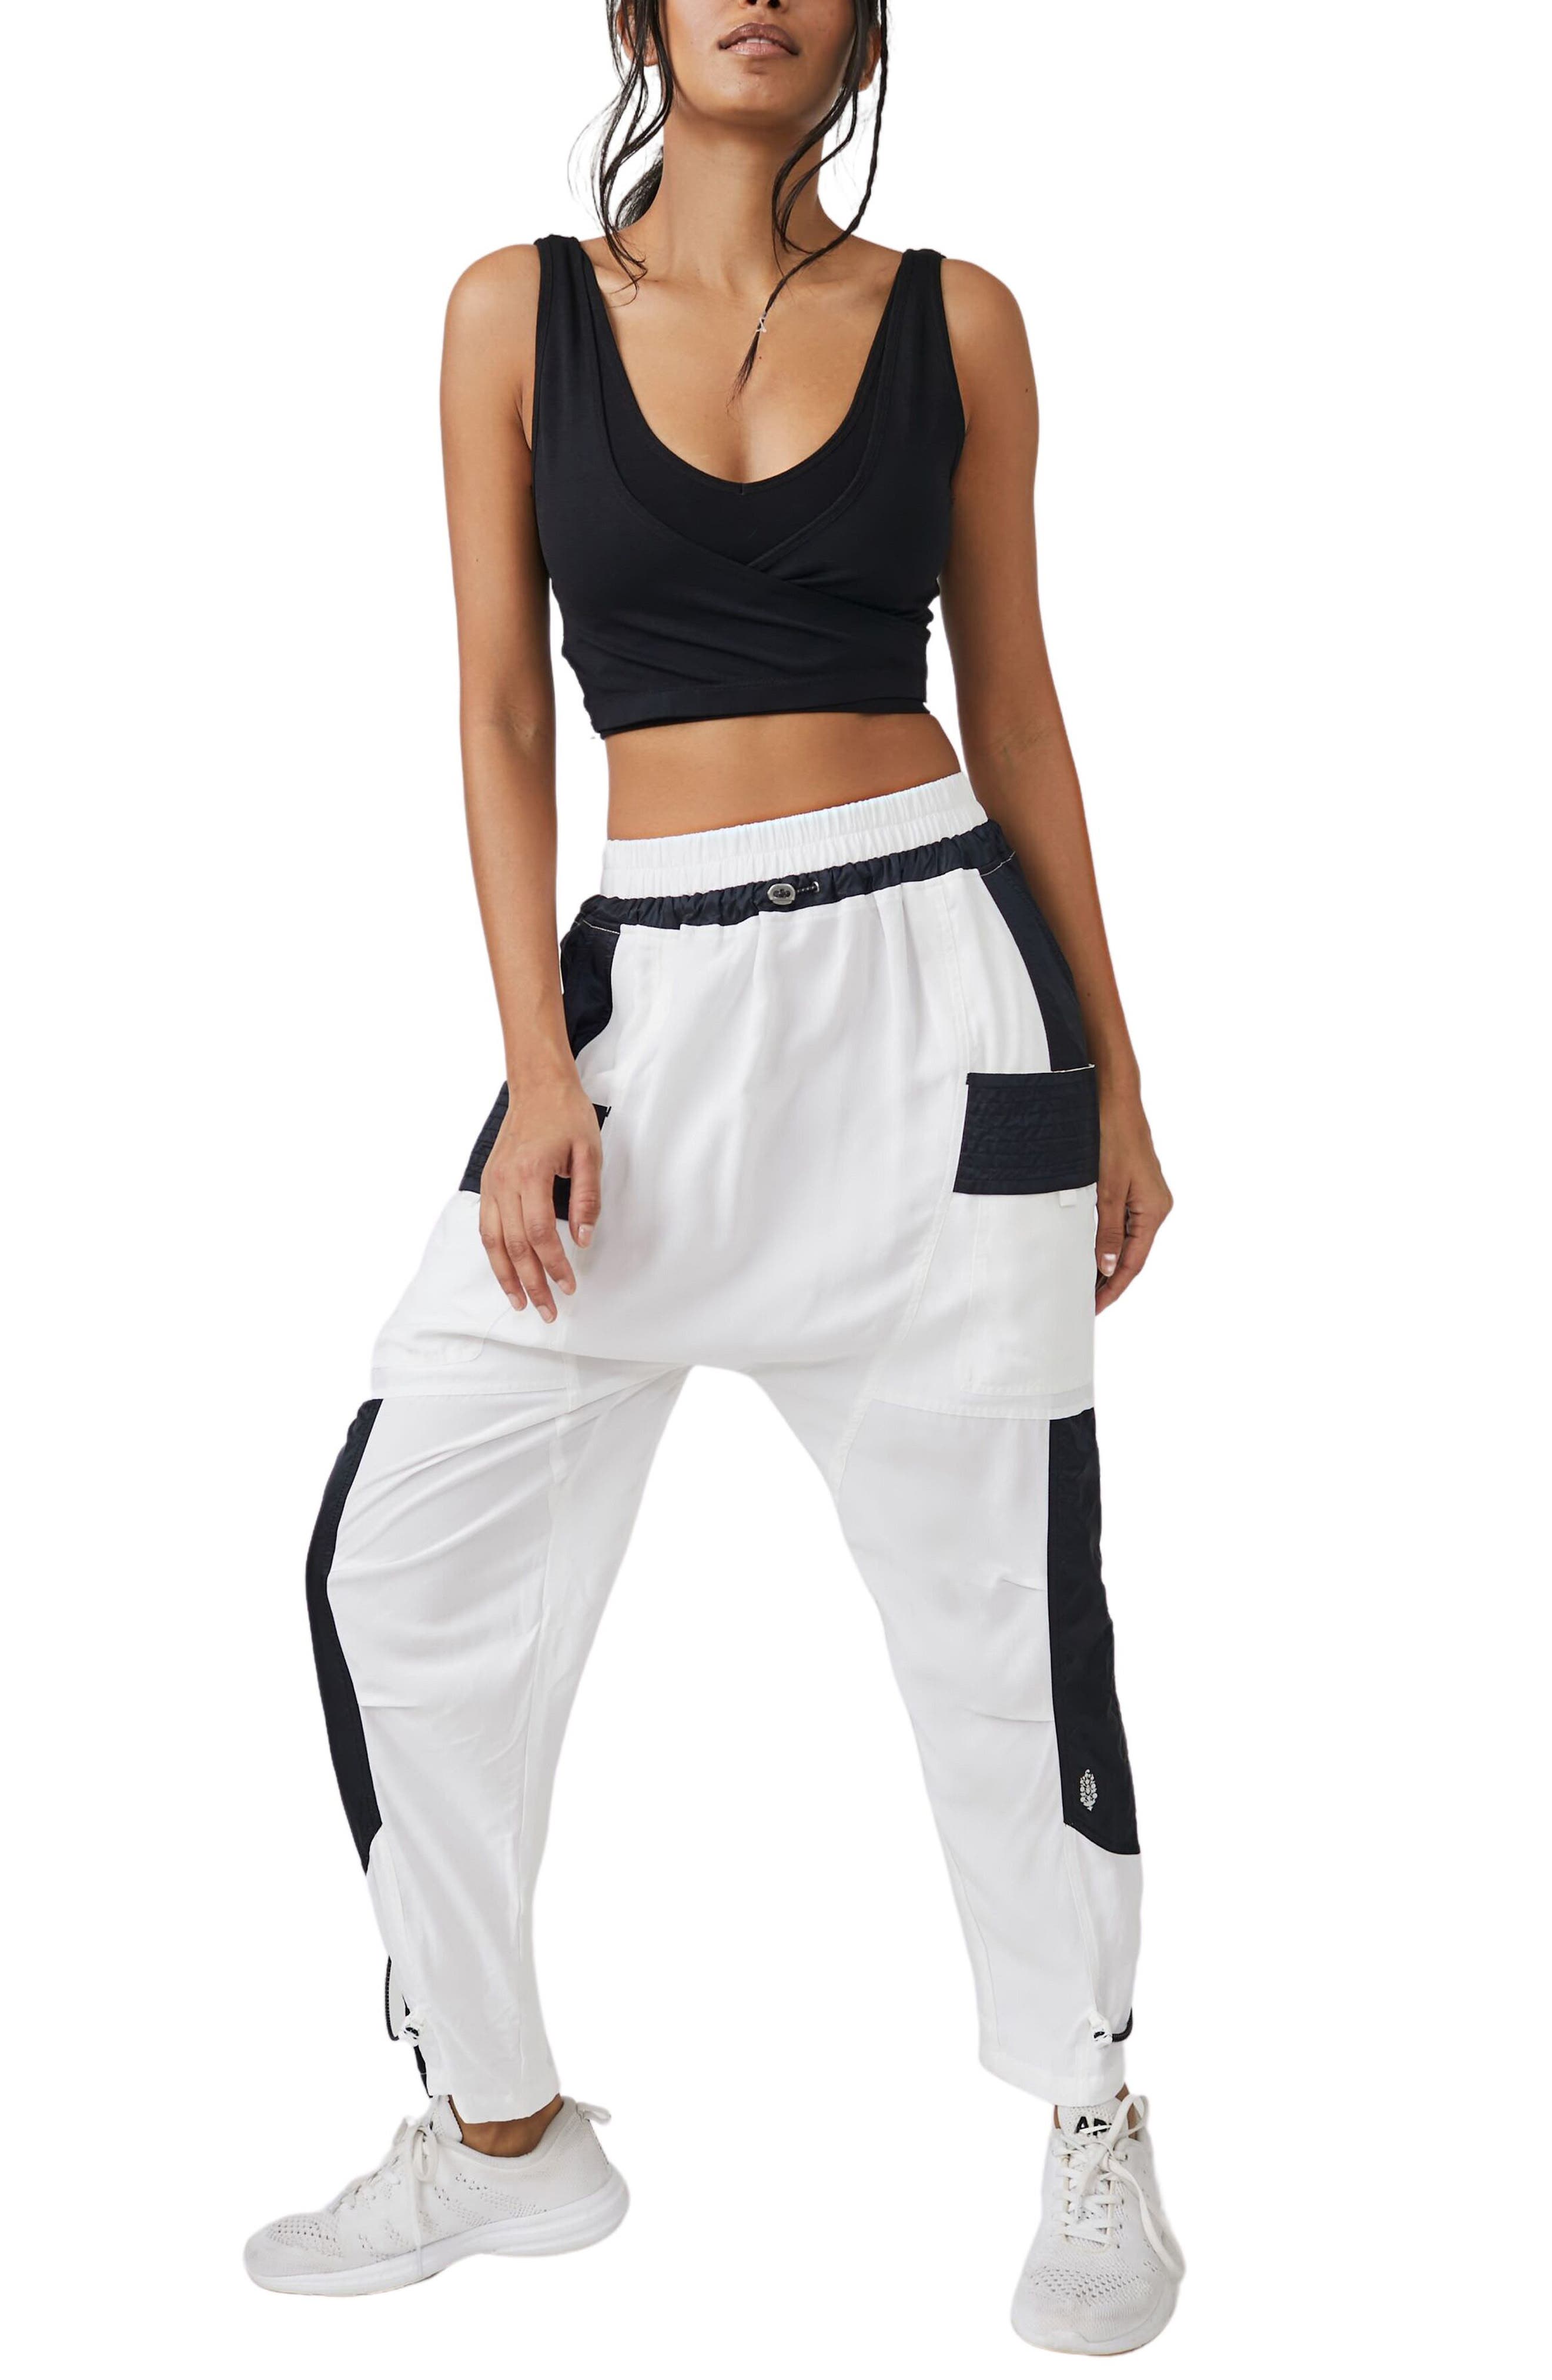 FP Movement Tricked Out Colorblock Cargo Pants in White Combo